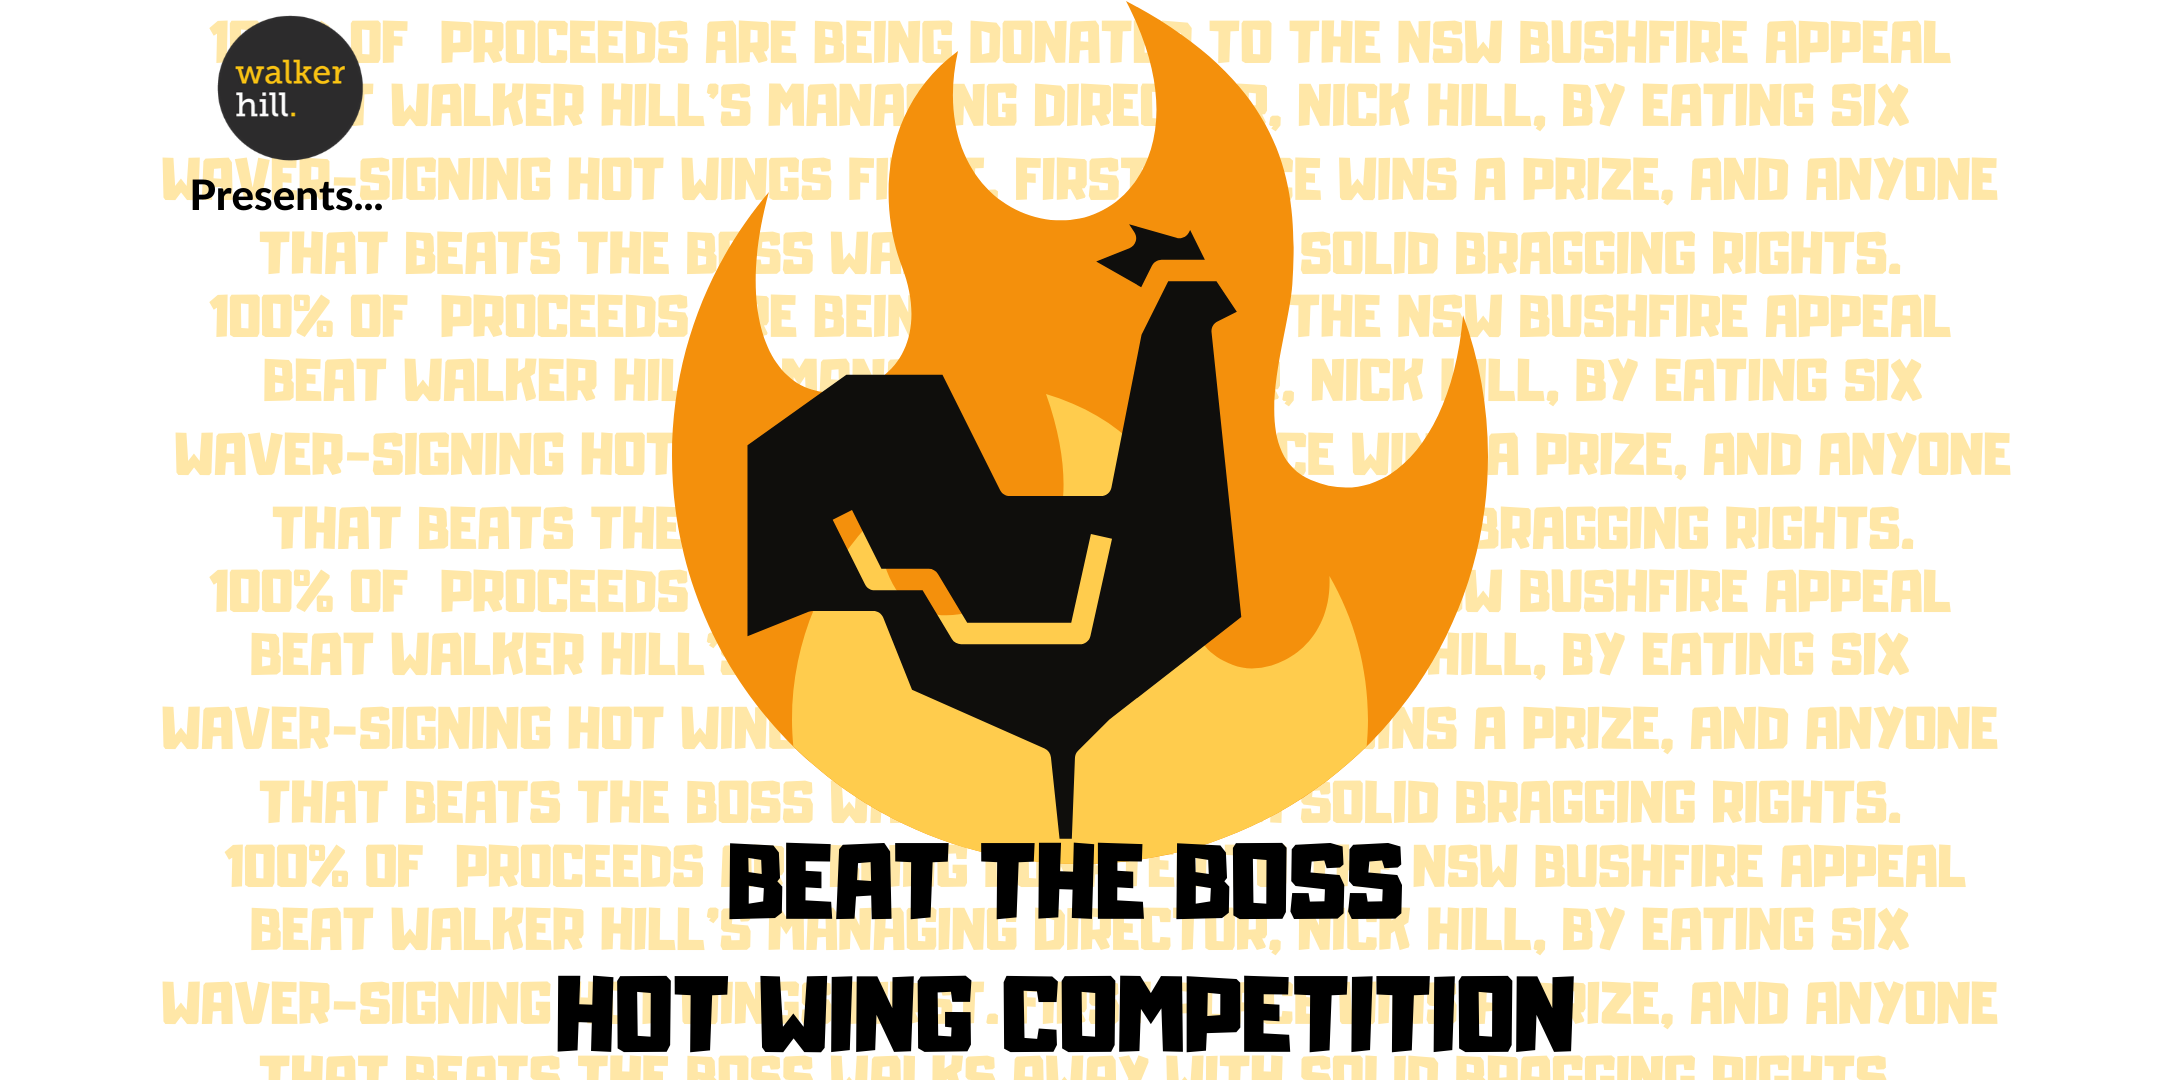 Beat the Boss Hot Wings Competition For the NSW Bushfire Appeal